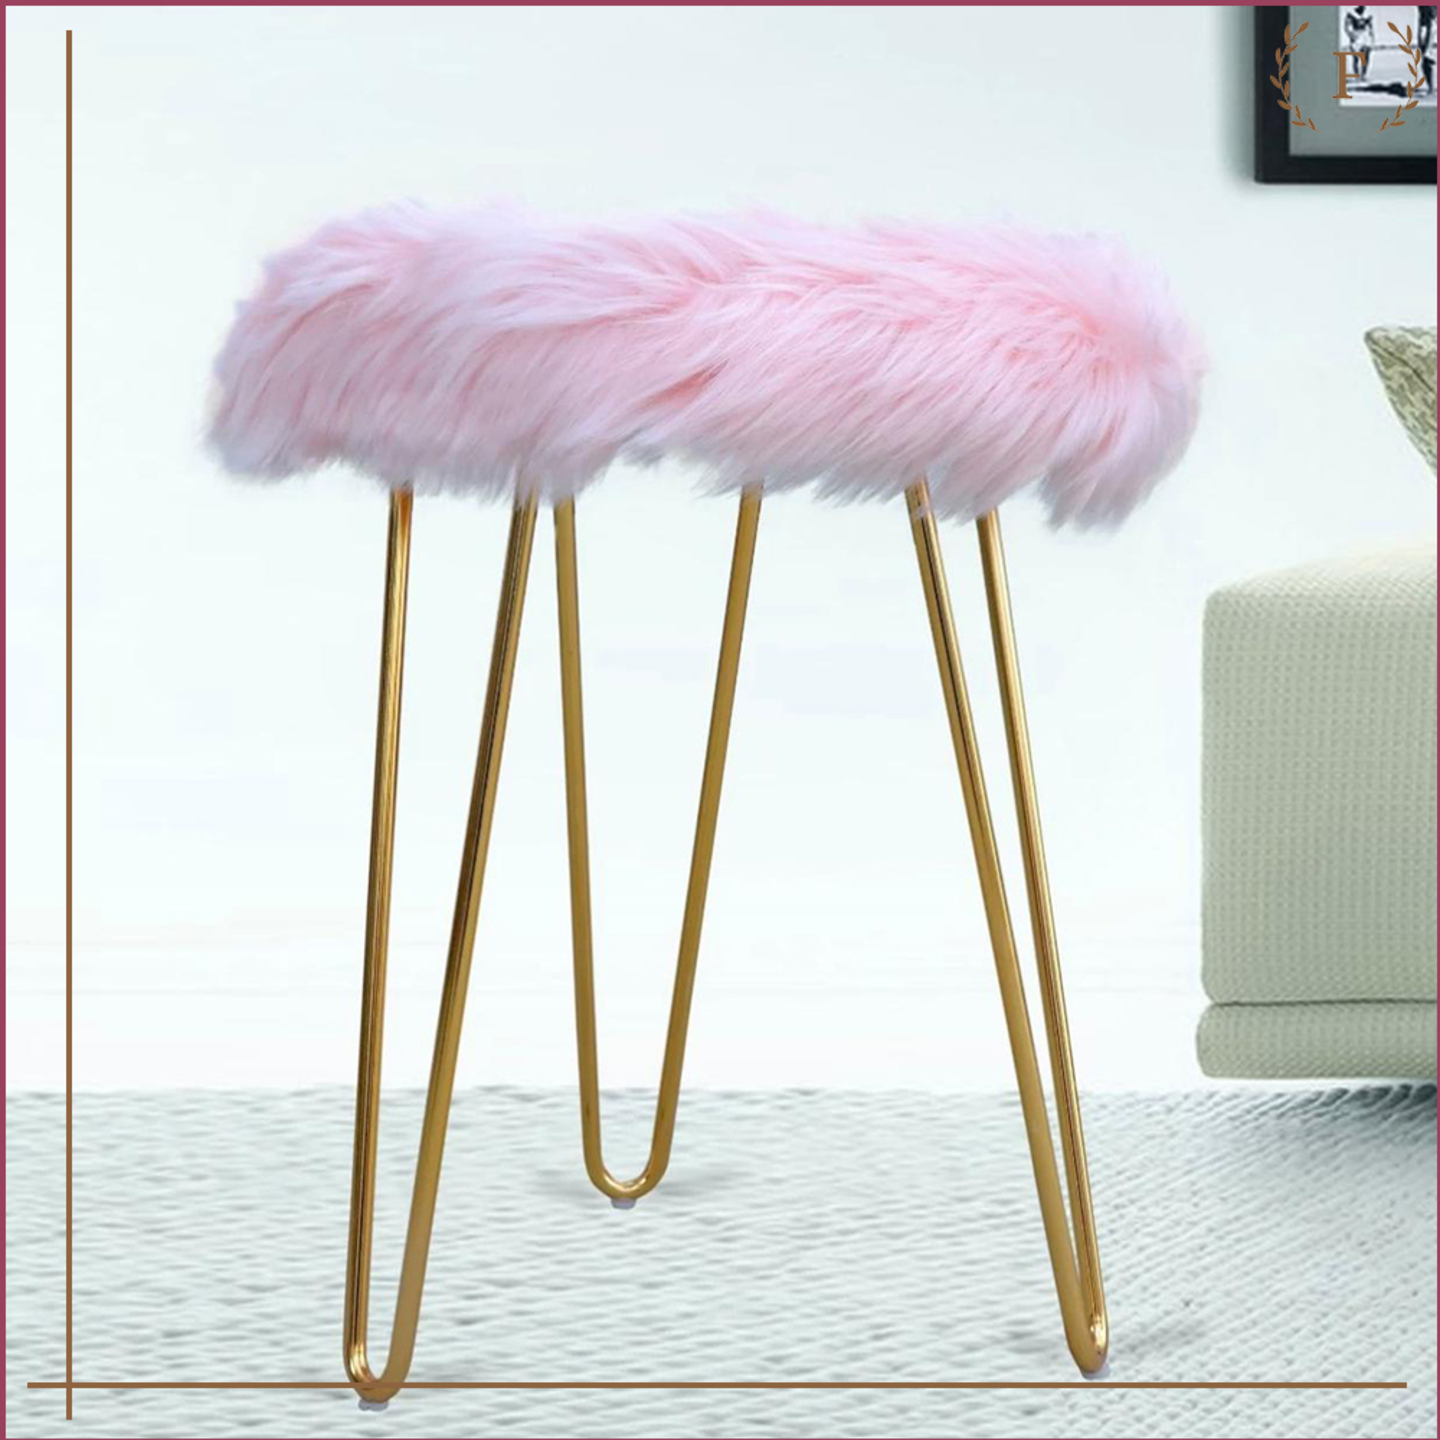 Faux Fur Stools|Cast Iron Easy Portable| Living Room Foot Rest Stools